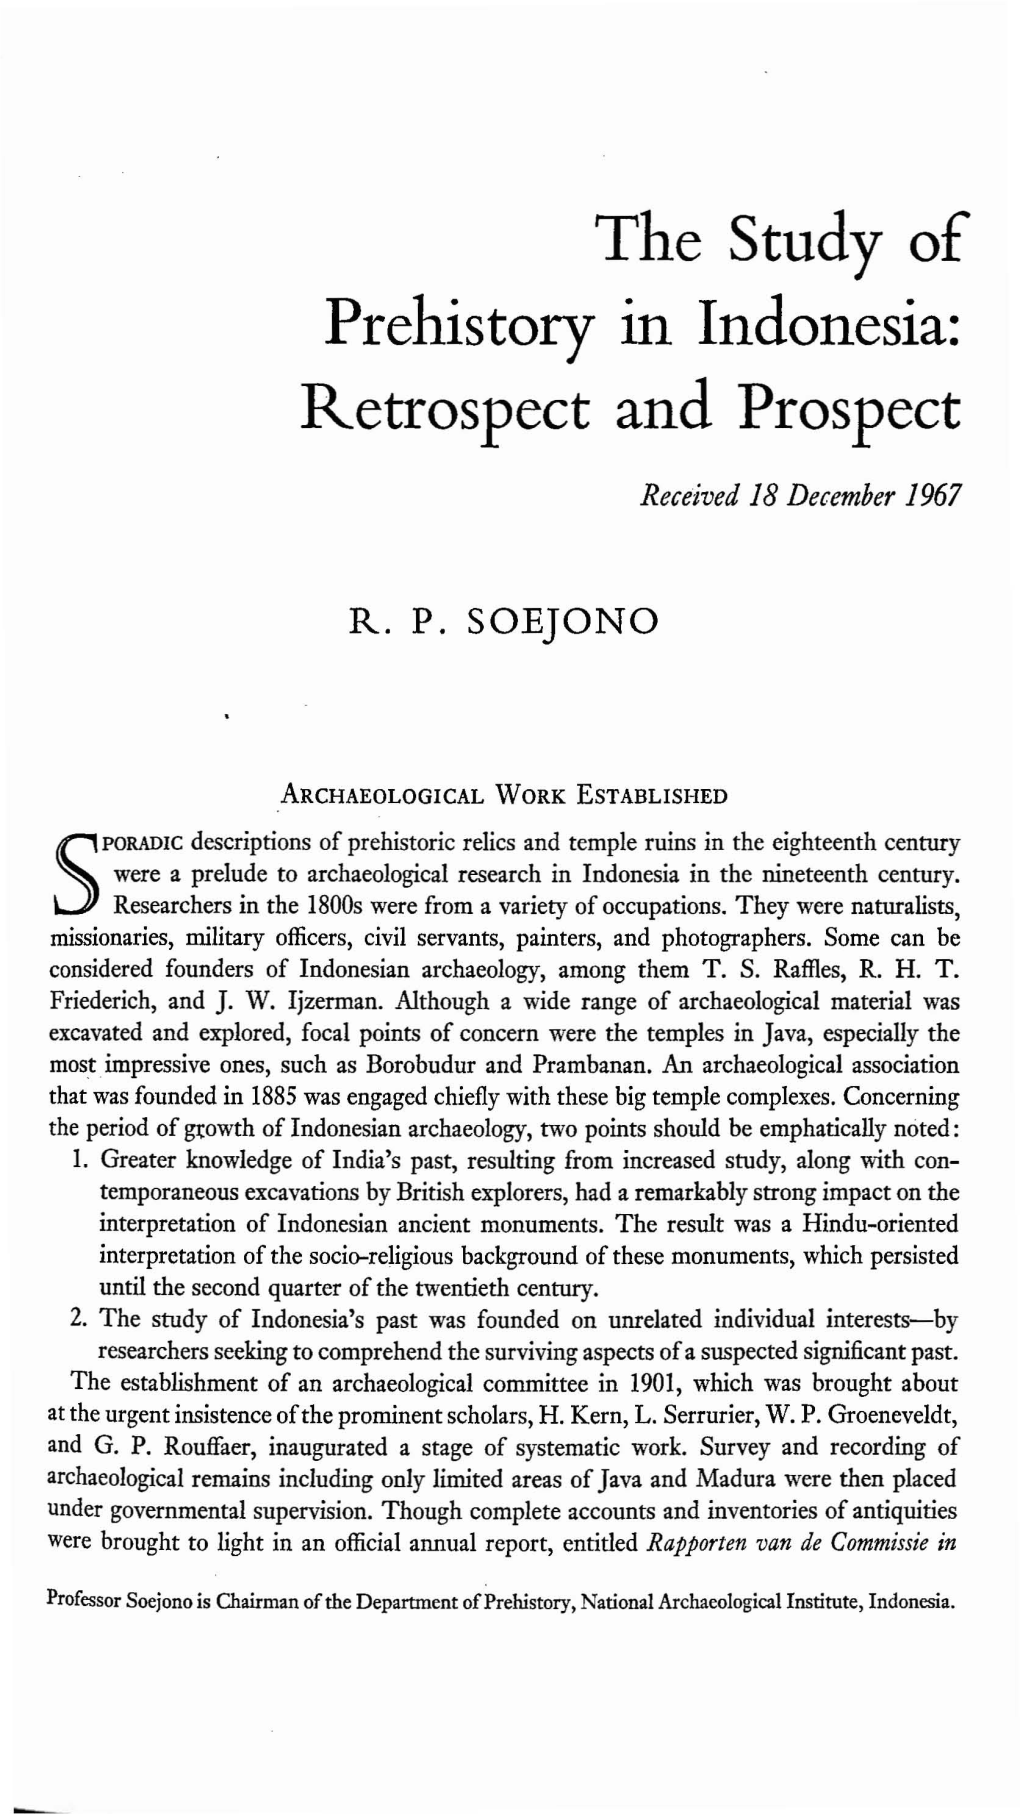 The Study of Prehistory in Indonesia: Retrospect and Prospect